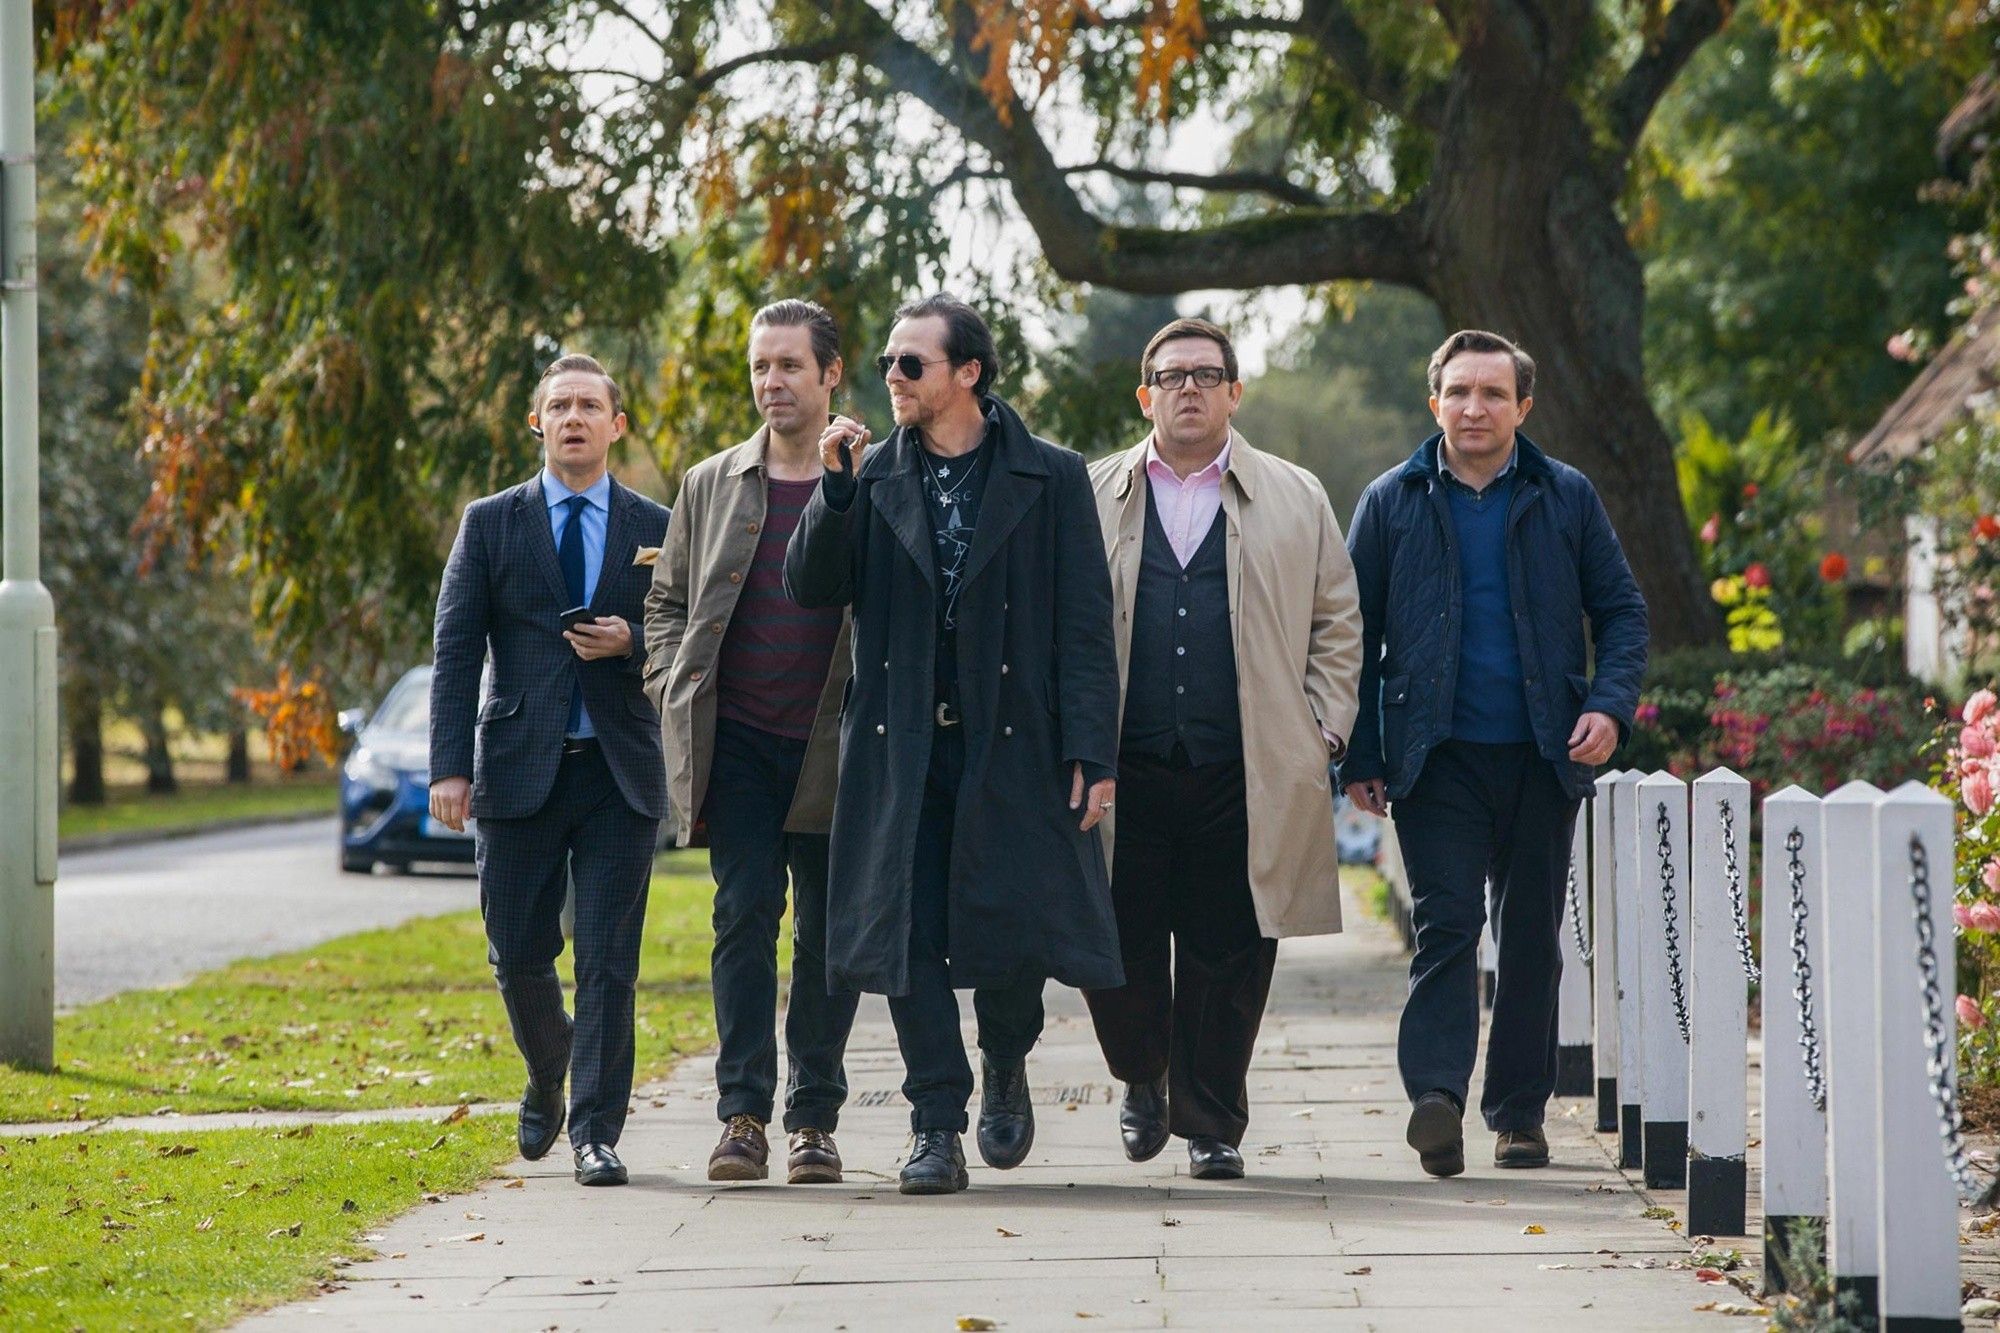 Martin Freeman, Paddy Considine, Simon Pegg, Nick Frost and Eddie Marsan in Focus Features' The World's End (2013)